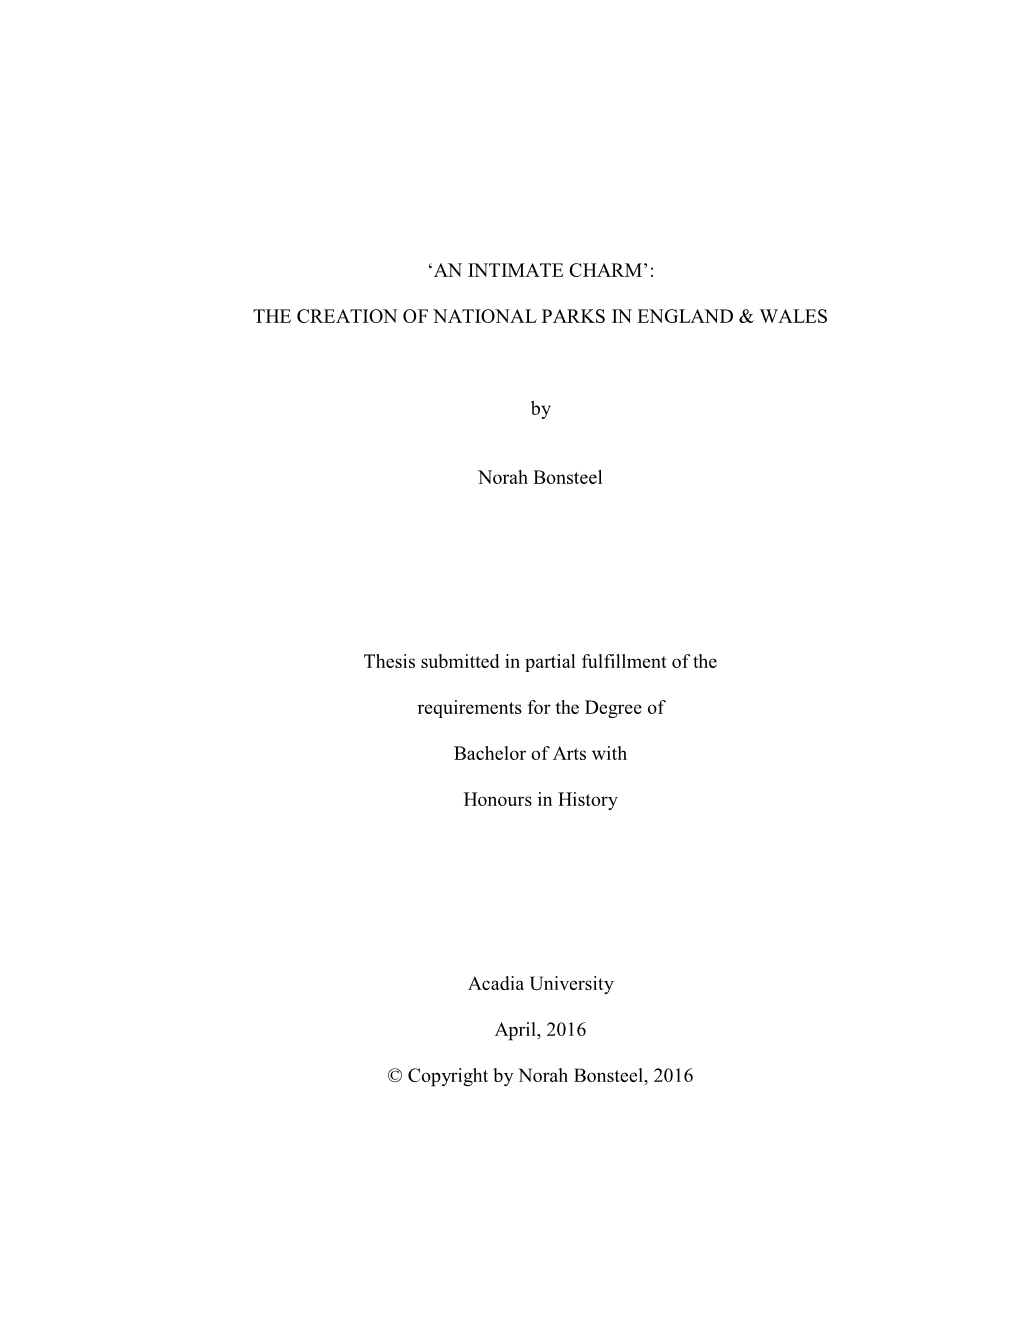 'AN INTIMATE CHARM': the CREATION of NATIONAL PARKS in ENGLAND & WALES by Norah Bonsteel Thesis Submitted in Partial Fu